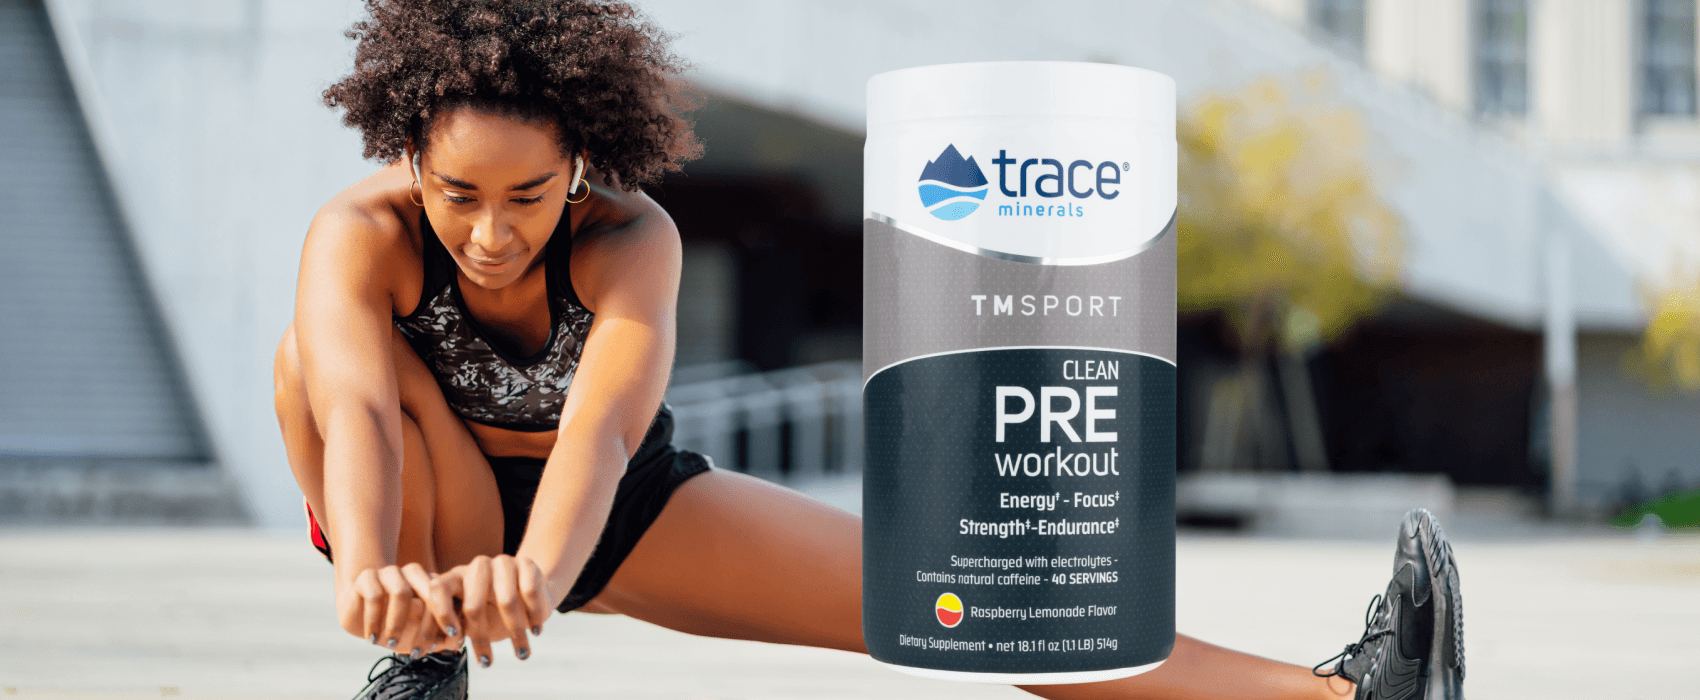 Clean Pre-Workout, Featured in Forbes as One of the "Best Pre-Workouts for Women" - Trace Minerals